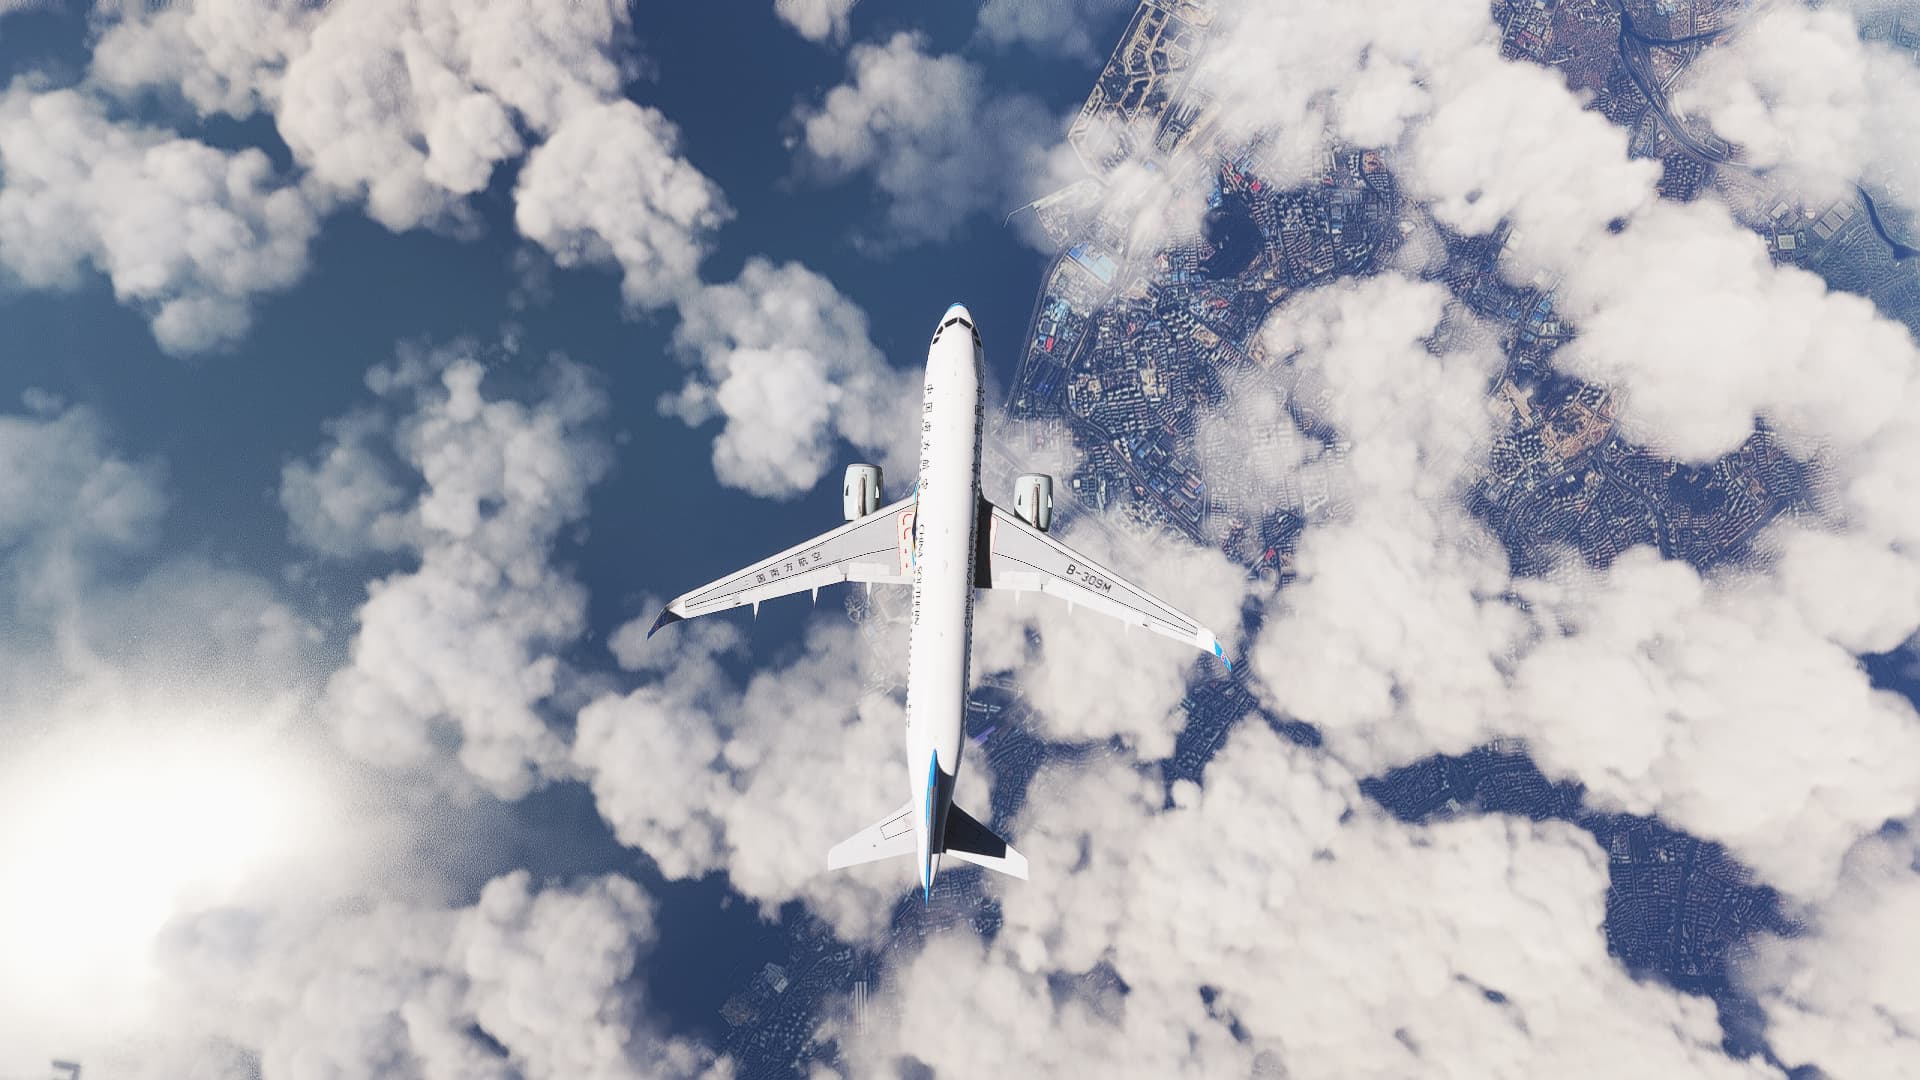 A birds eye view of an Airbus A320 NEO flying above scattered clouds and a city below.